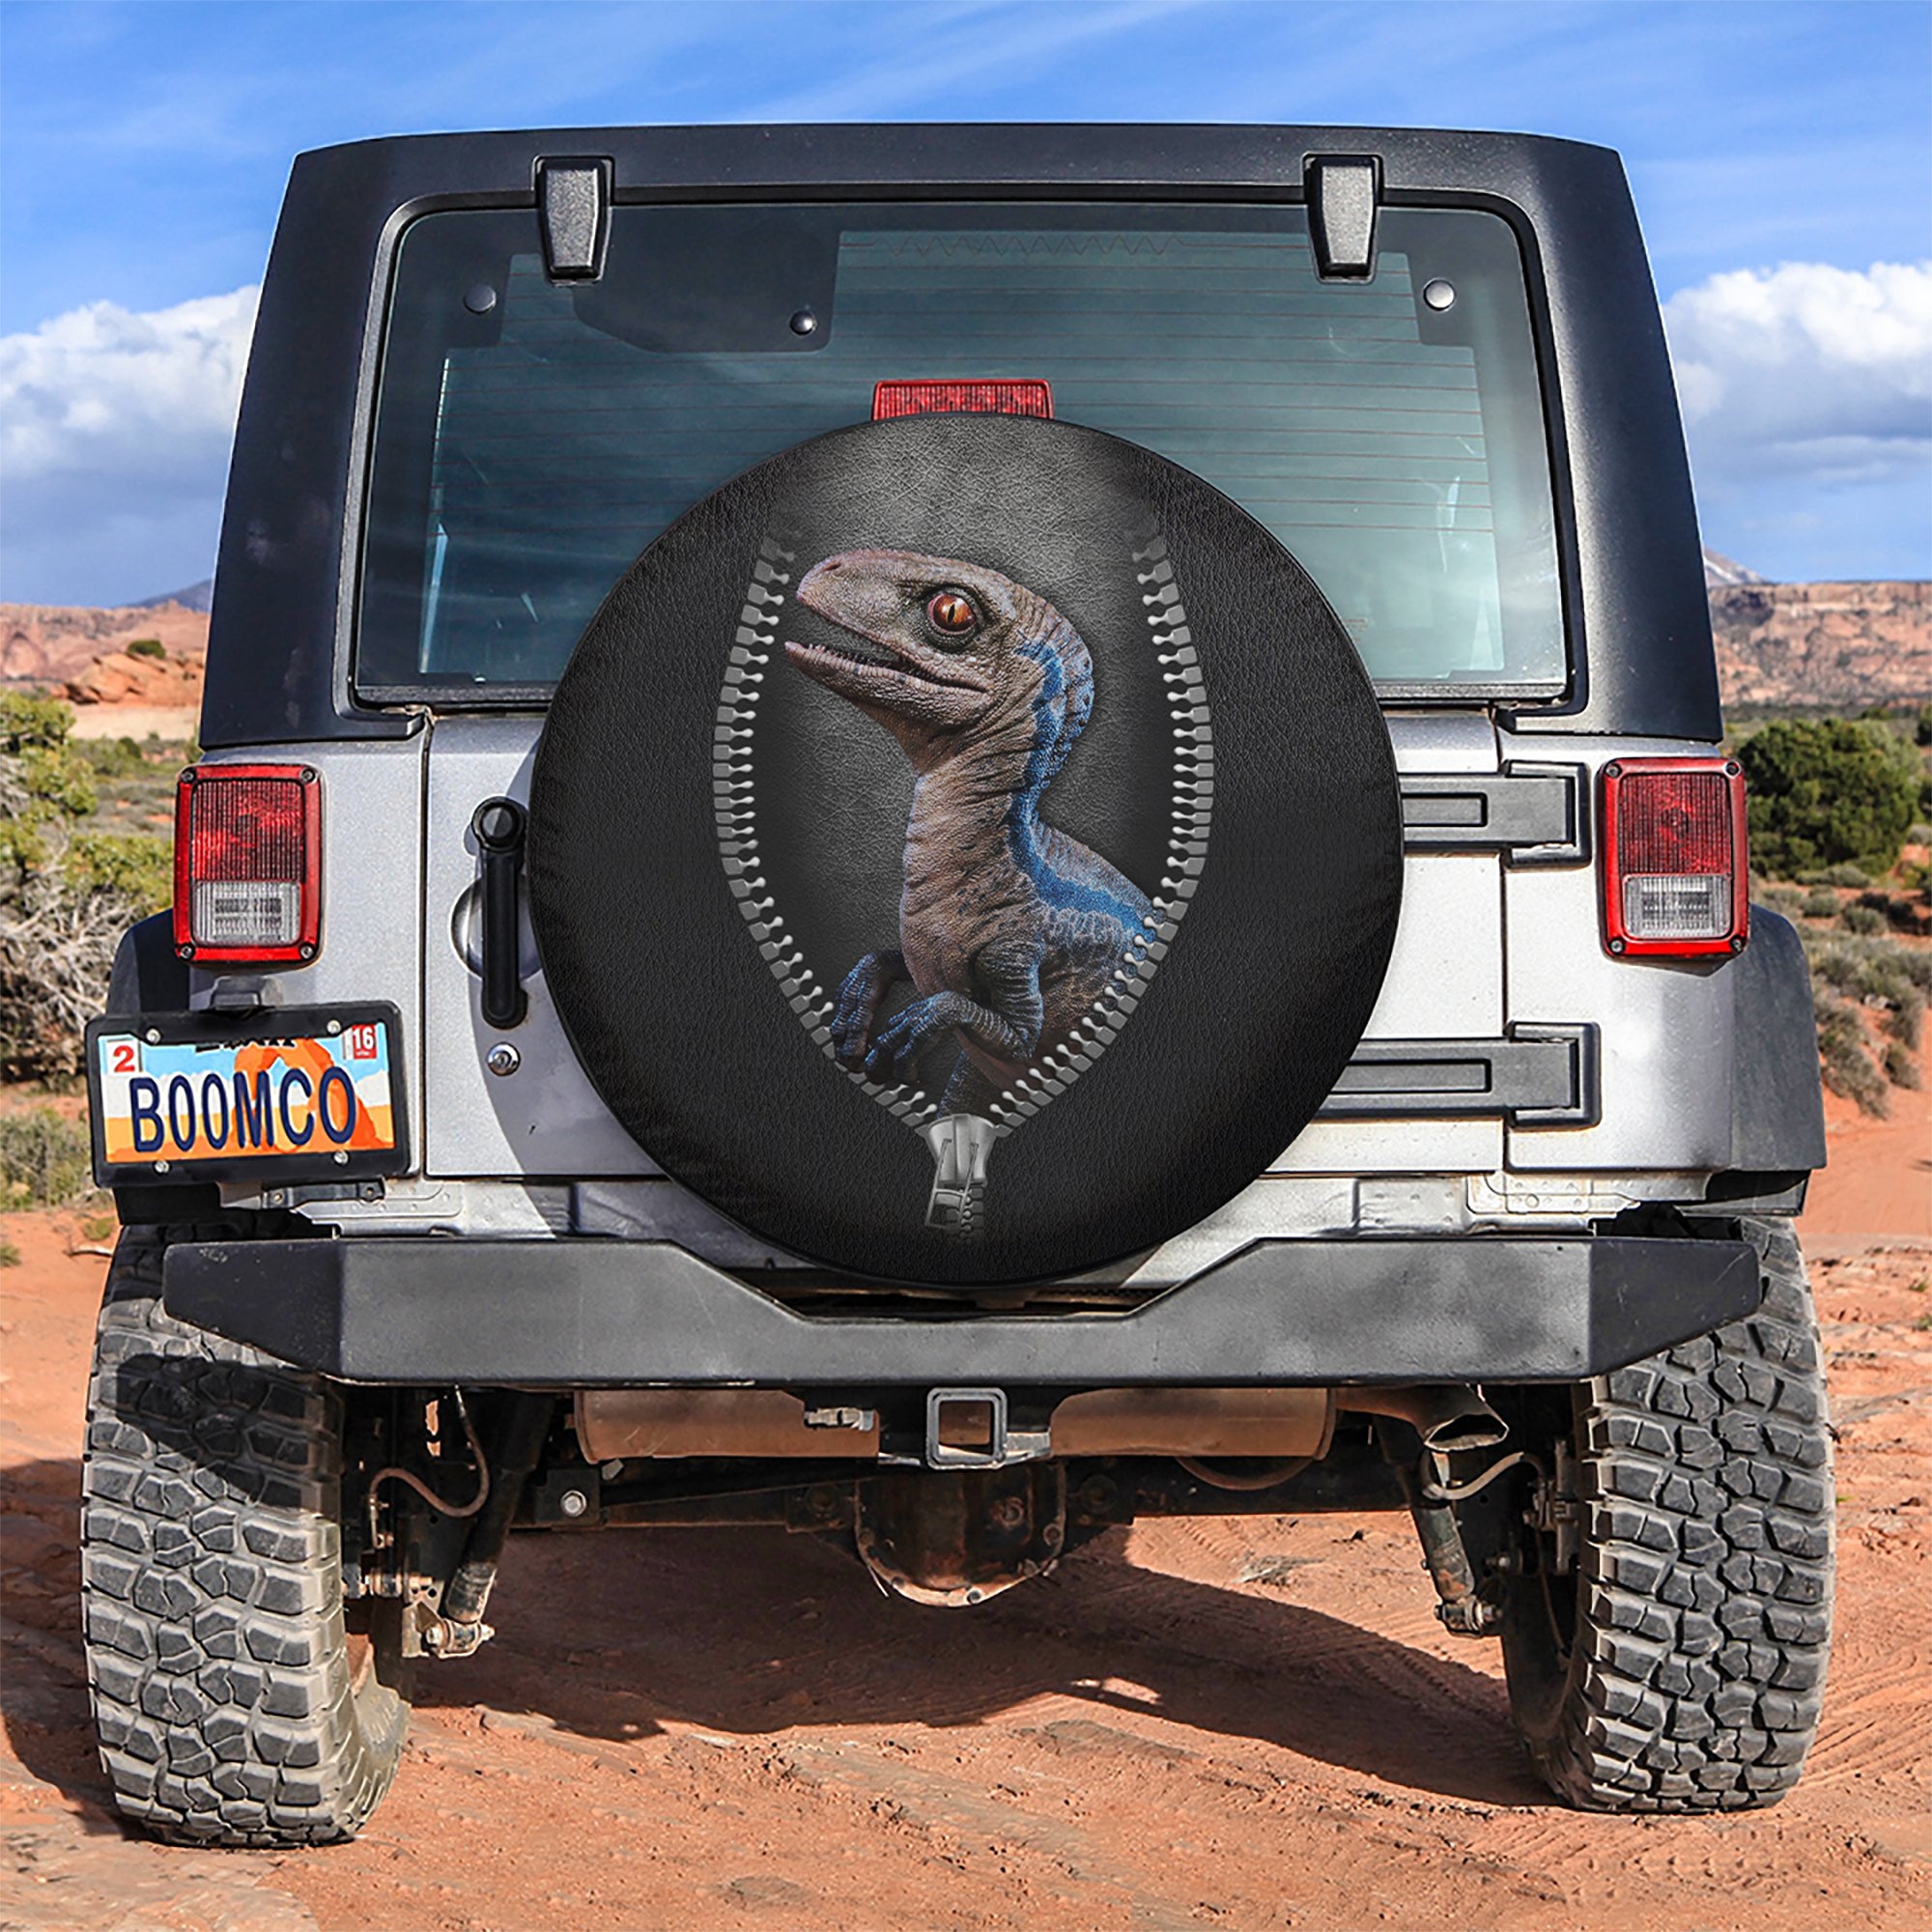 Cute Blue Velociraptor Jurassic World Dinousaur Car Spare Tire Covers Gift For Campers Nearkii